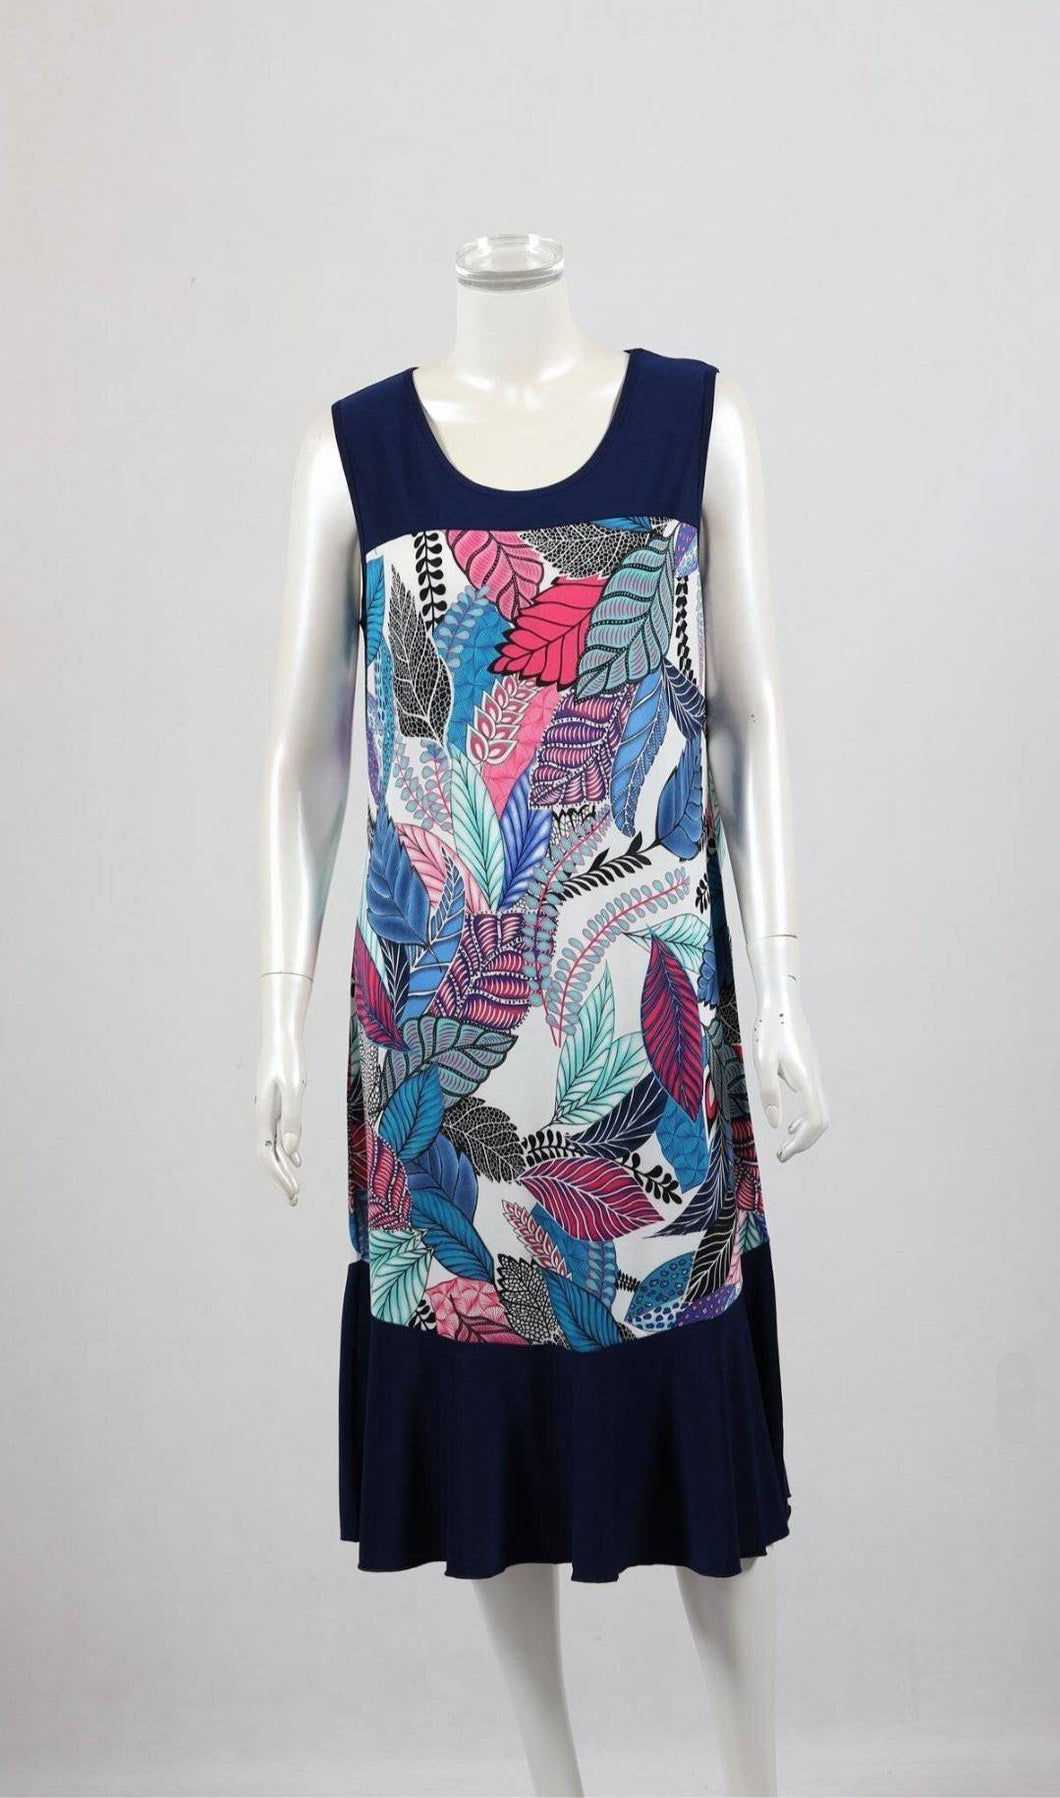 Dress Tunic Navy and Floral Sleeveless - Tracey Glynn Fashions